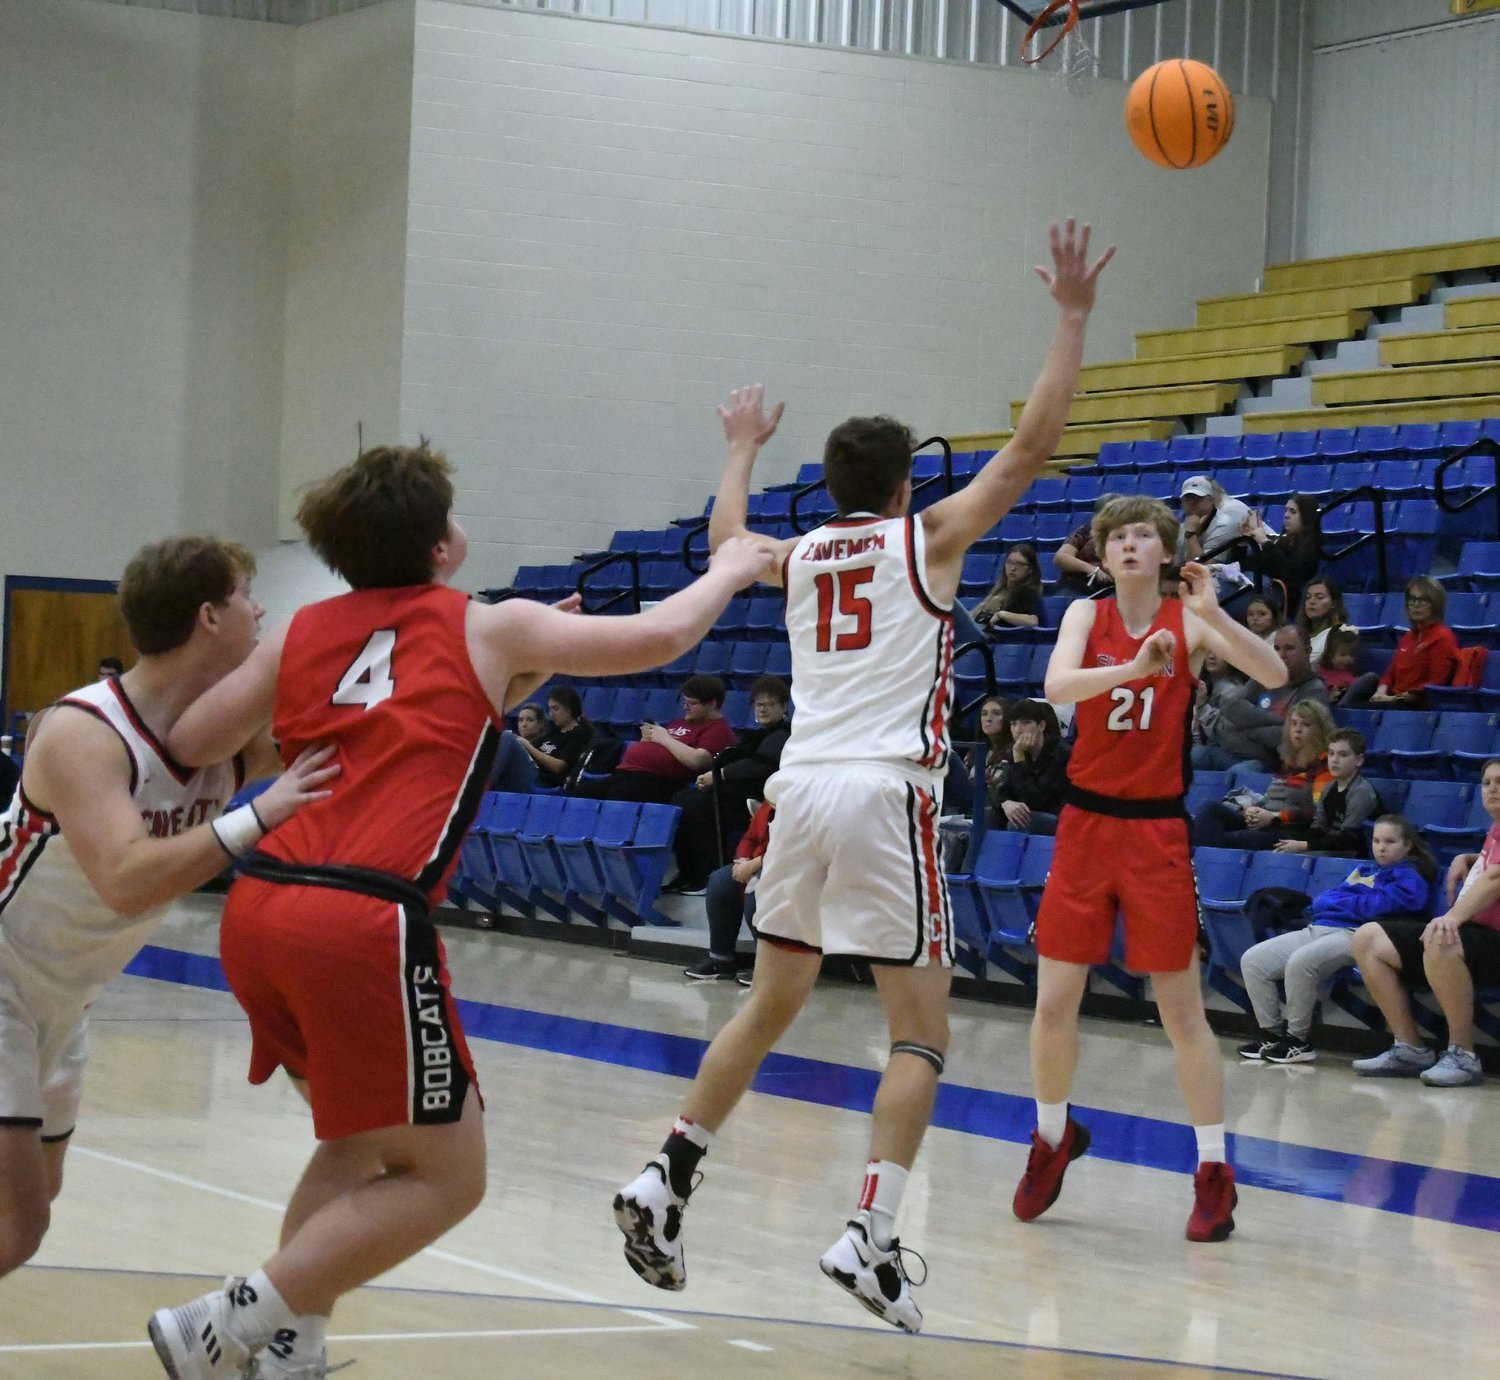 An image from the Flippin-Cave City senior boys game played Wednesday in the Ultimate Auto Group Invitational at The Hangar.